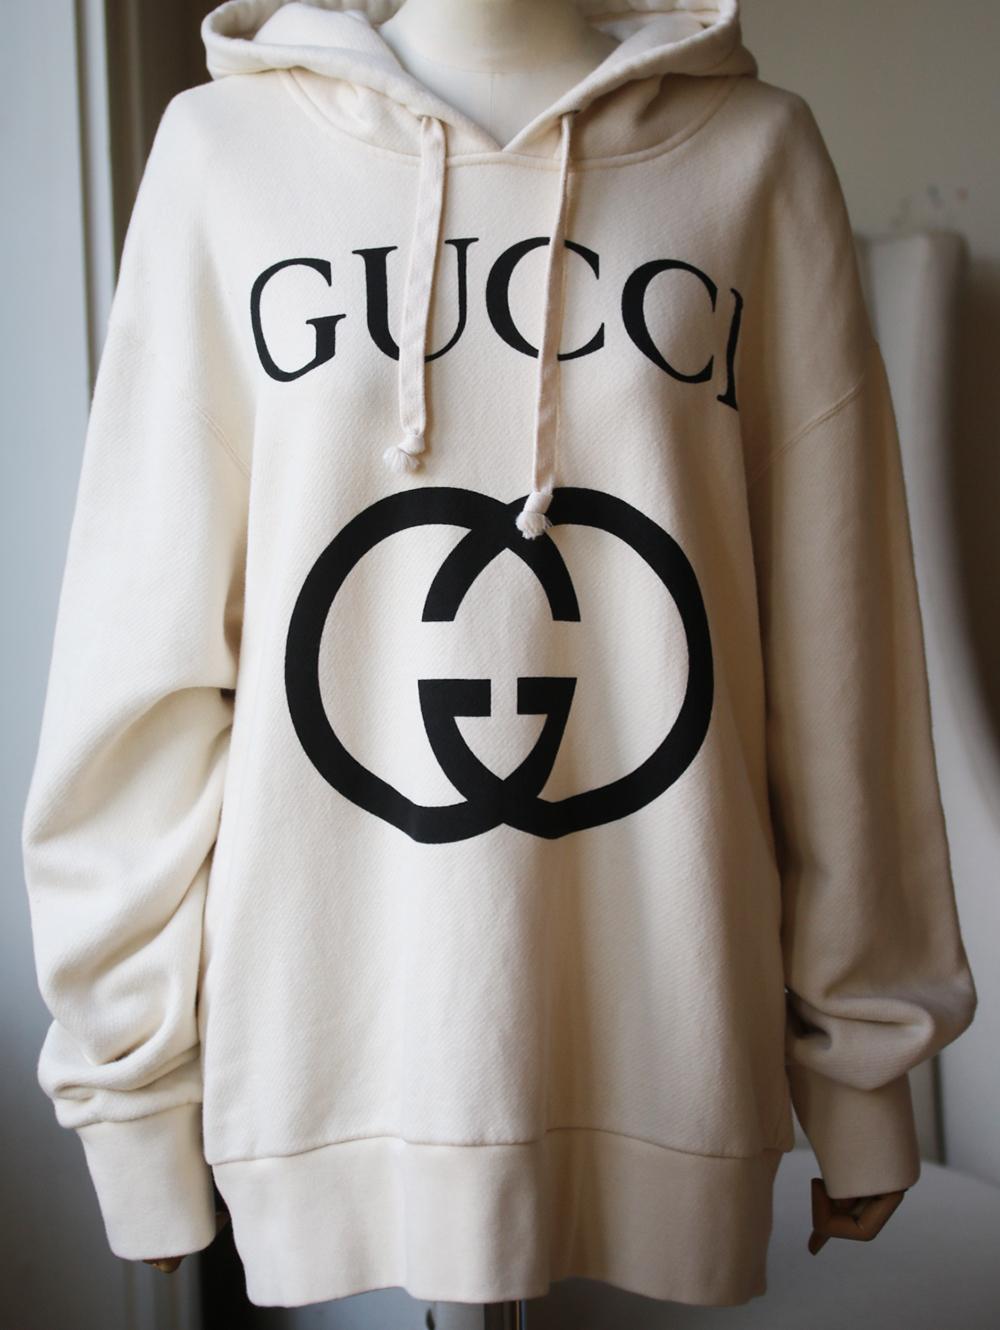 Gucci Off-white heavy felted cotton jersey. Interlocking G print. Fixed hood. Oversize fit. 100% cotton. Made in Italy. 

Size: Medium (UK 10, US 6, FR 38, IT 42)

Condition: As new condition, no sign of wear. 